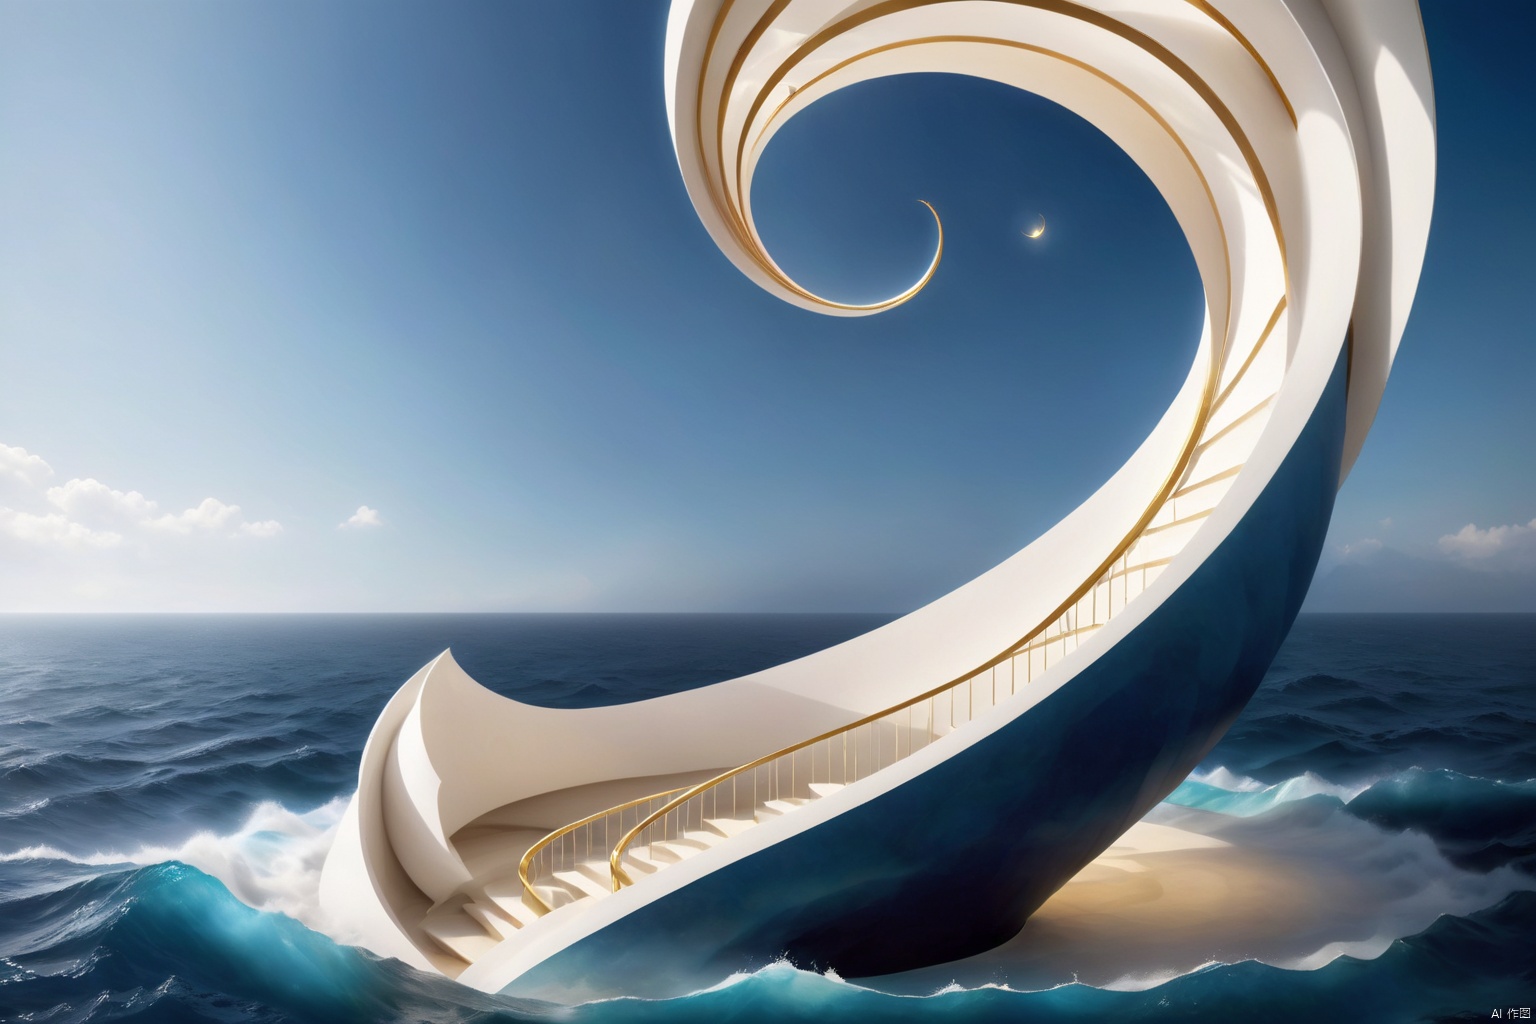 Magical in appearance and deep in the sea, the Spiral Tower is inspired by the golden Spiral, its form is elegant and dynamic. The tower adopts a spiraling structure, and each level follows strict mathematical proportions, presenting a perfect geometric form. The sun shines through the delicate window mullions on the spiral curved surface, creating a mysterious and charming atmosphere, 3D rendering, highly detailed, natural lighting, mathematical design art, stunning visual feast, epic visual art architecture, master works, mathematical design art, stunning visual feast, visual art architecture, master works,